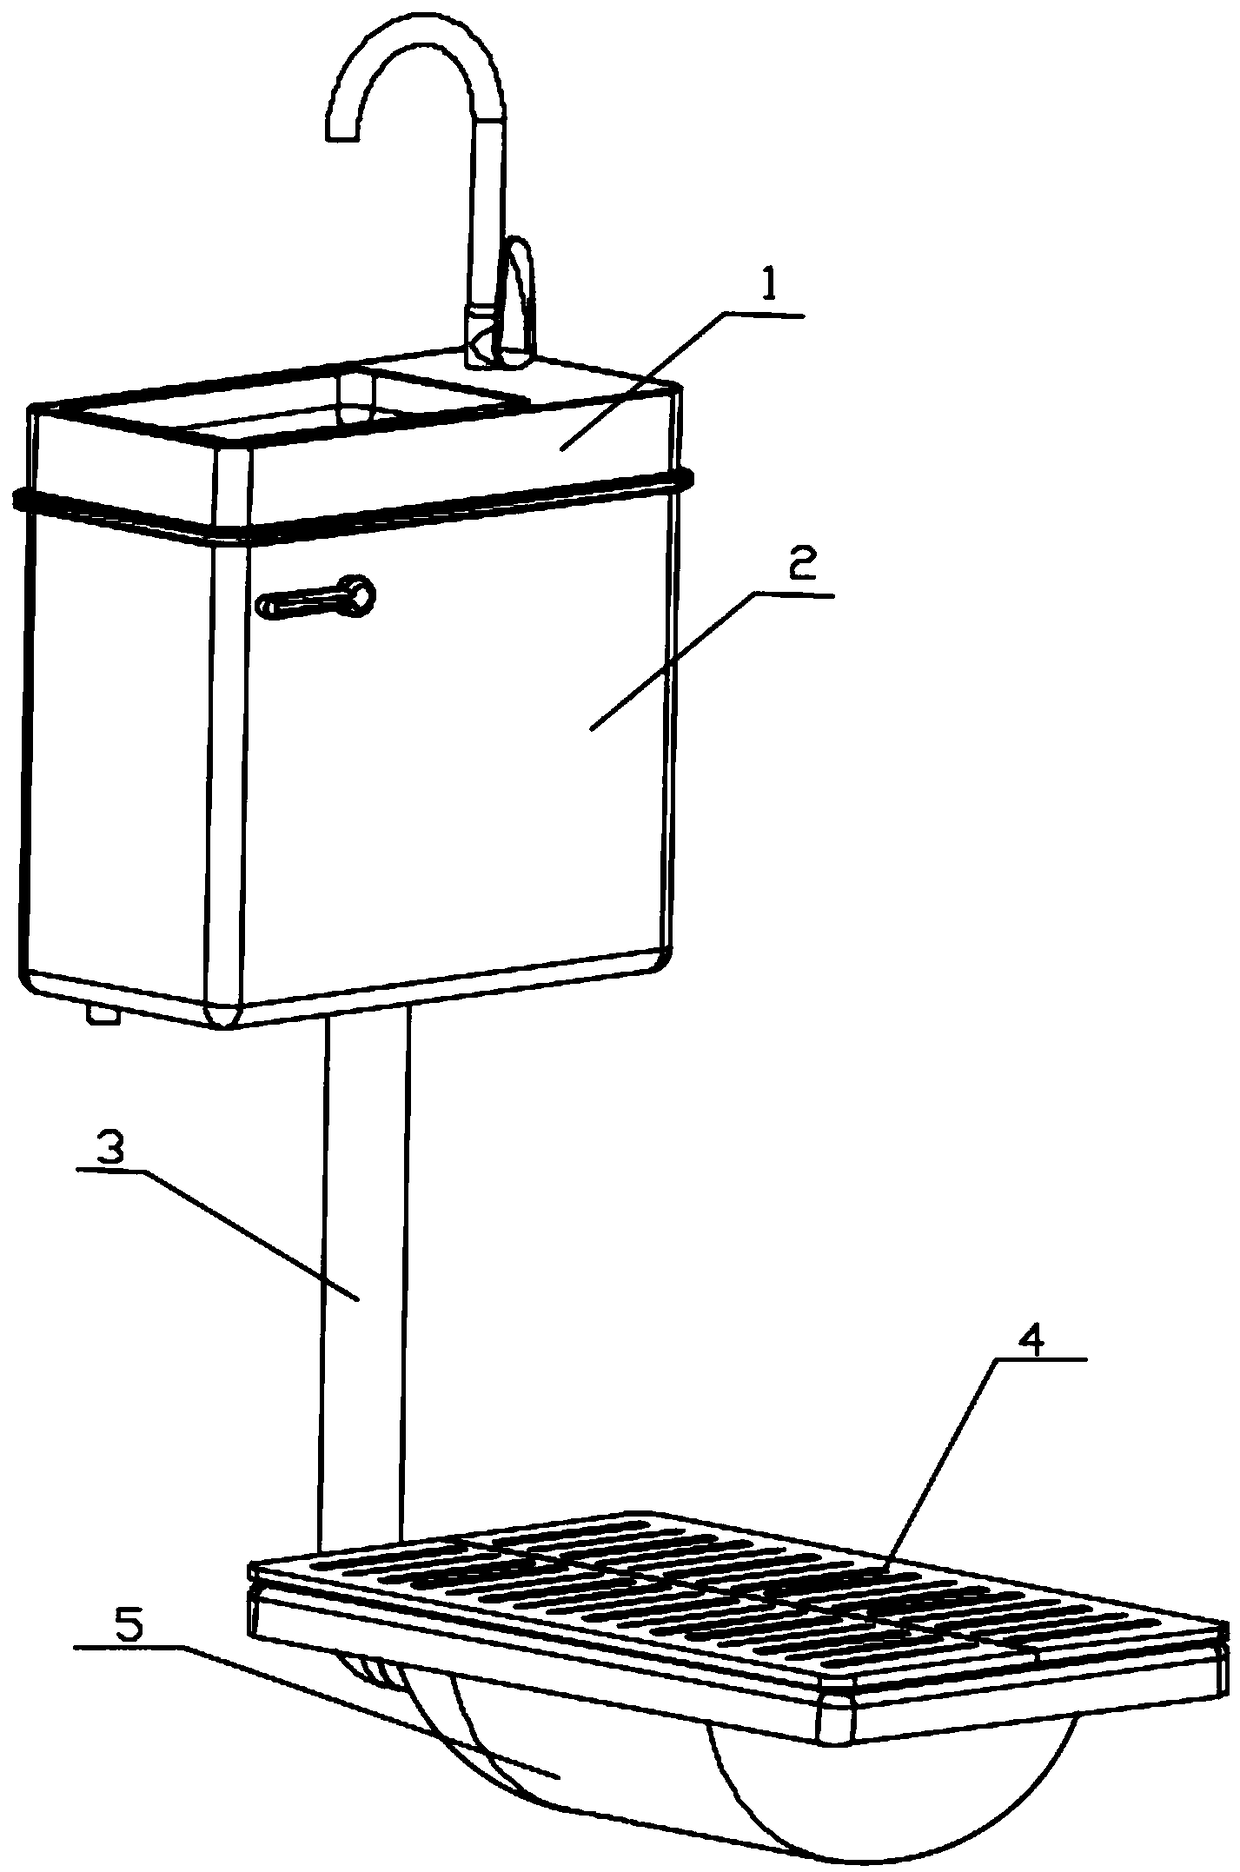 Environment-friendly flushing squatting pan capable of increasing space utilization rate